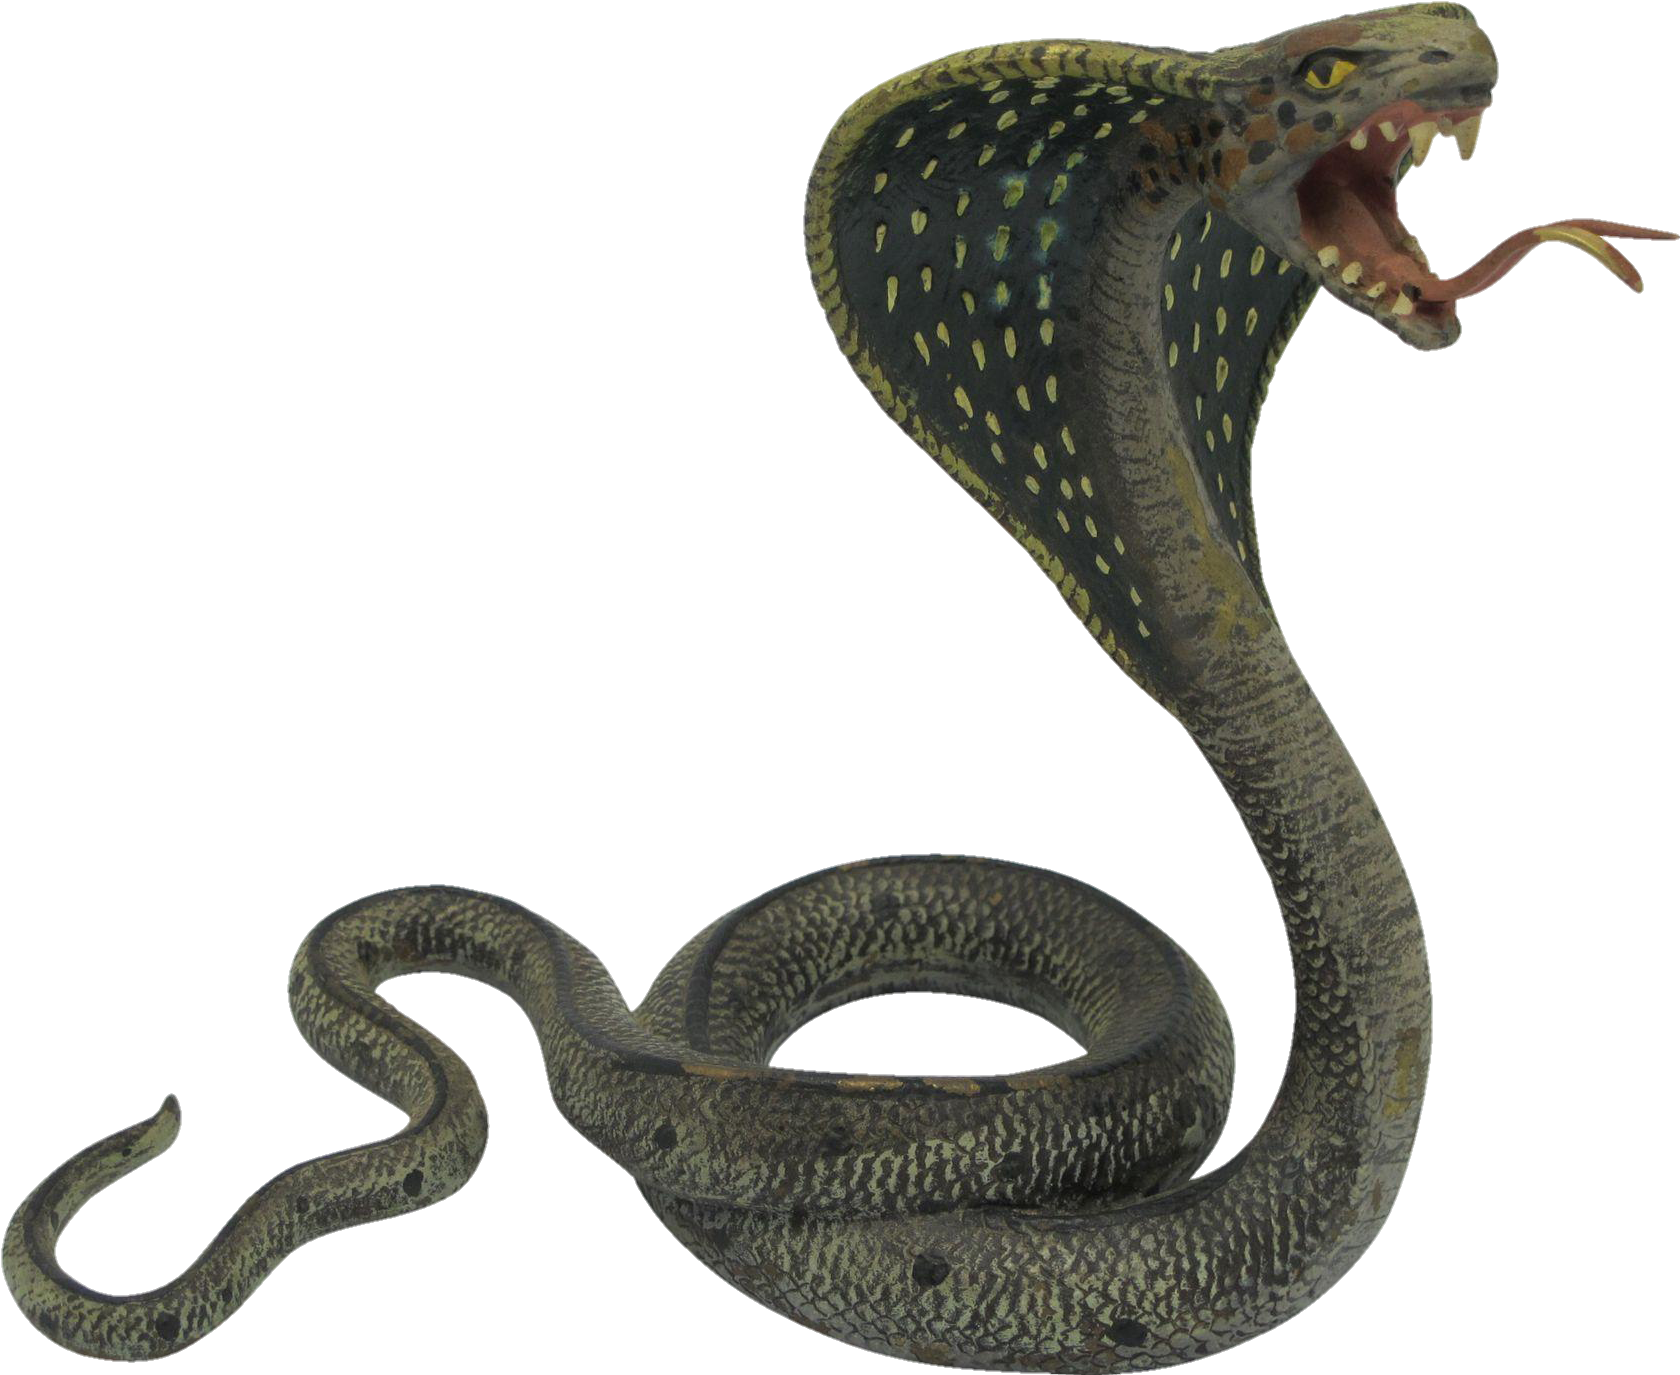 snake-png-image-pngfre-26